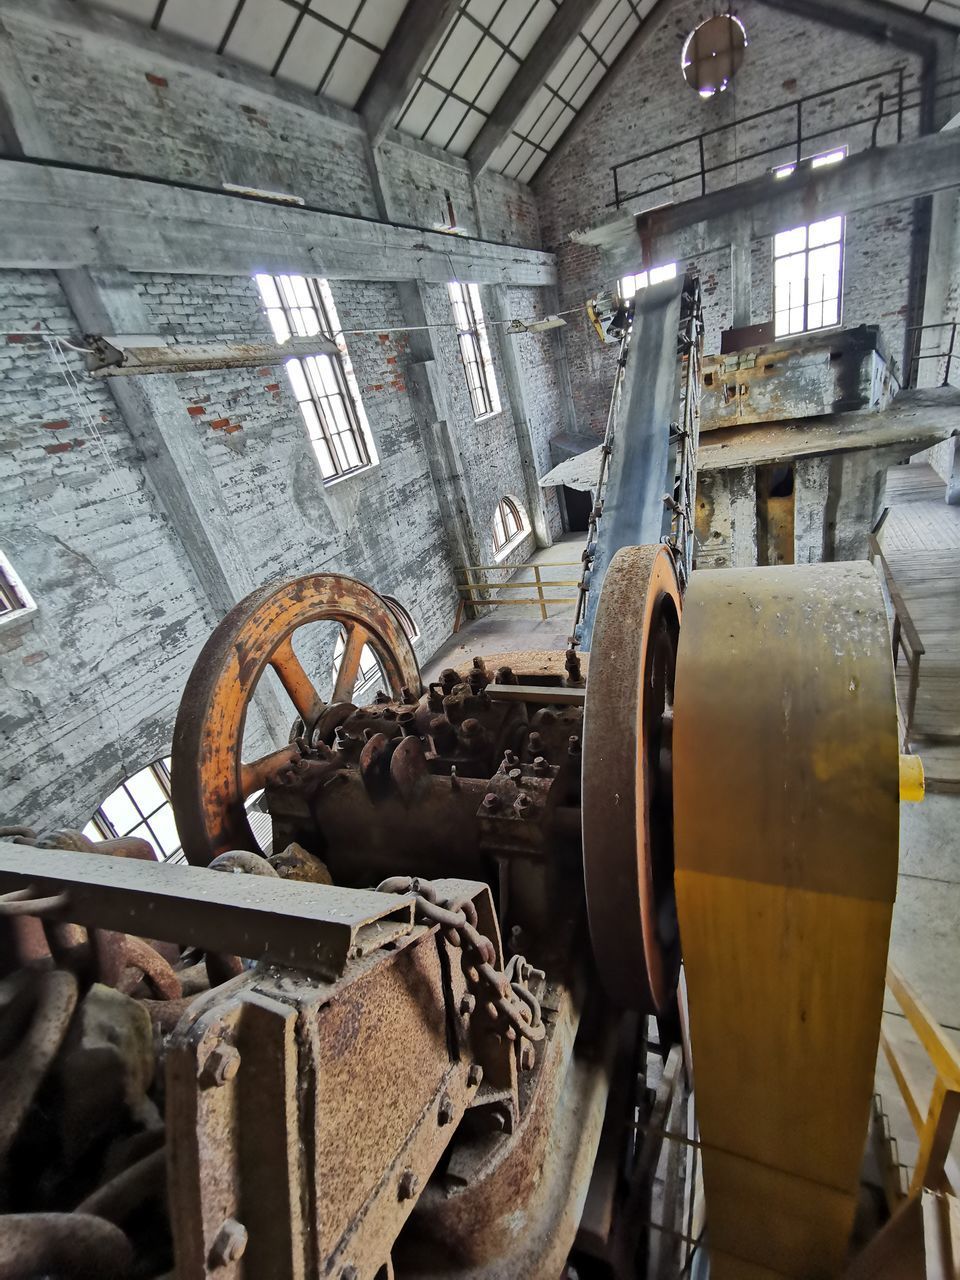 INTERIOR OF OLD MACHINERY